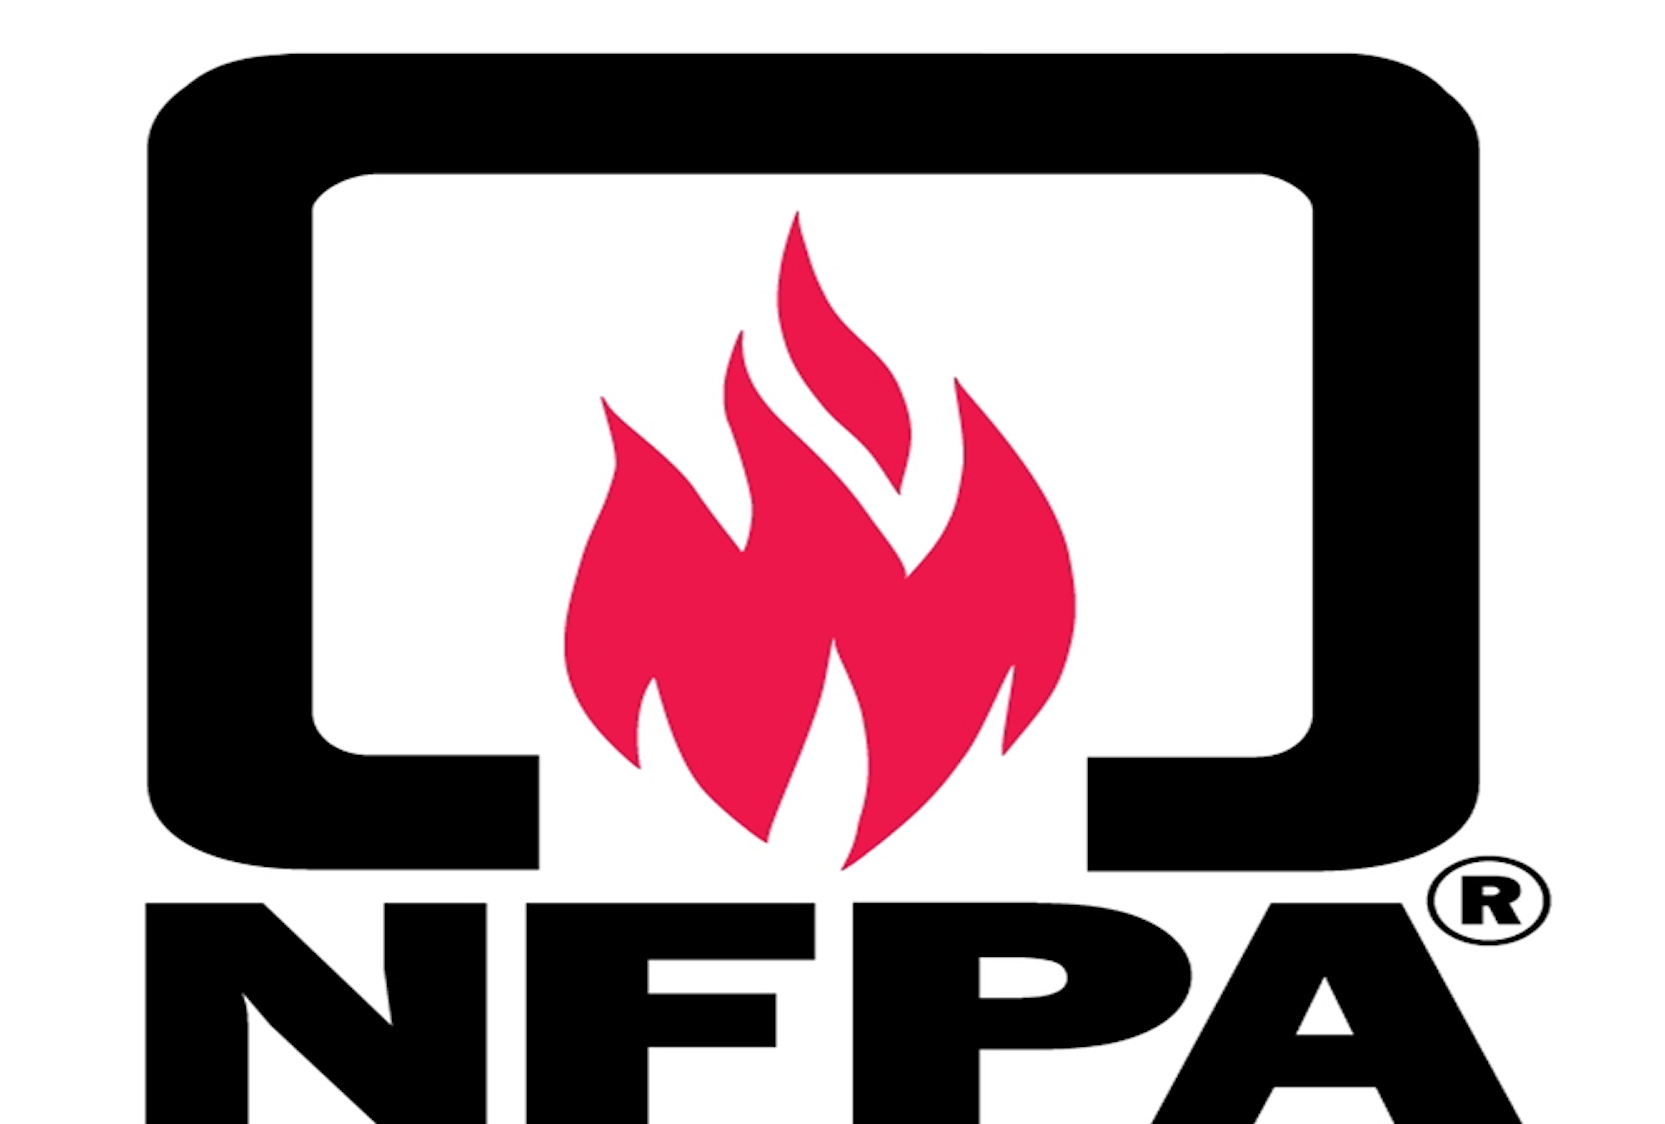 NFPA Hosts Conference and Expo in Las Vegas, June 1114 Firehouse